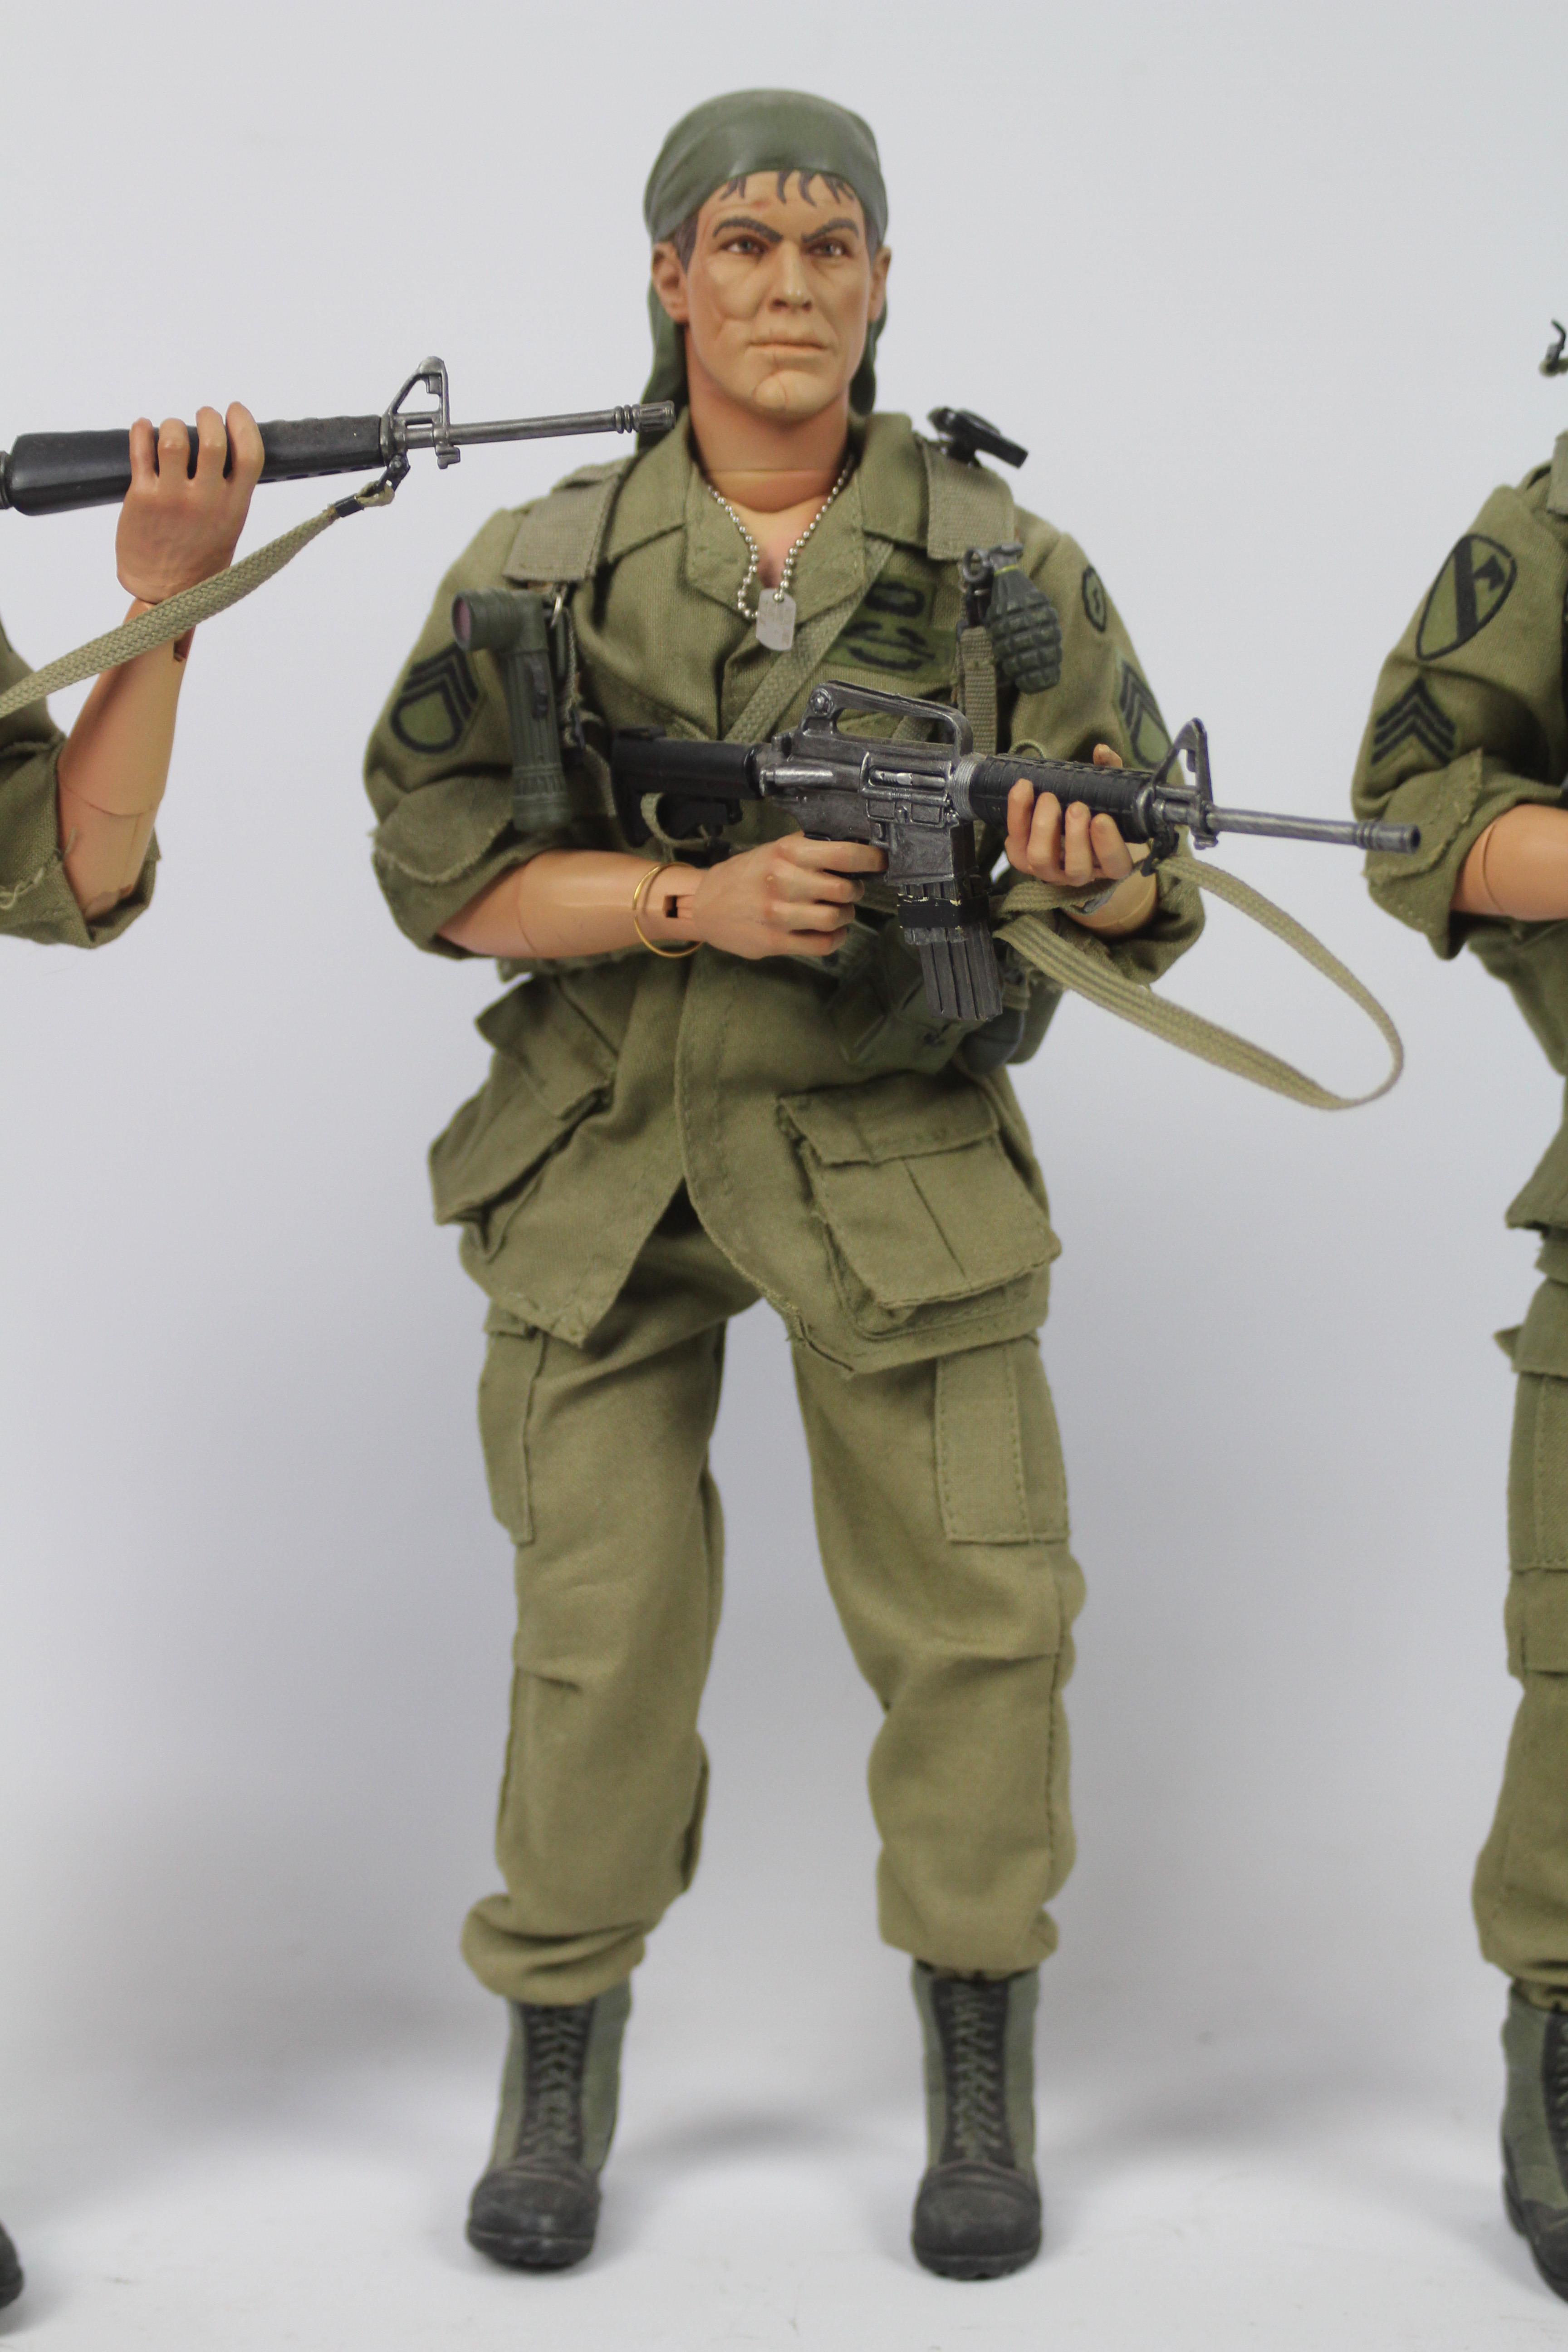 Sideshow Collectibles - Three unboxed 1:6 scale action figures from Sideshows 'Platoon' series, - Image 3 of 8